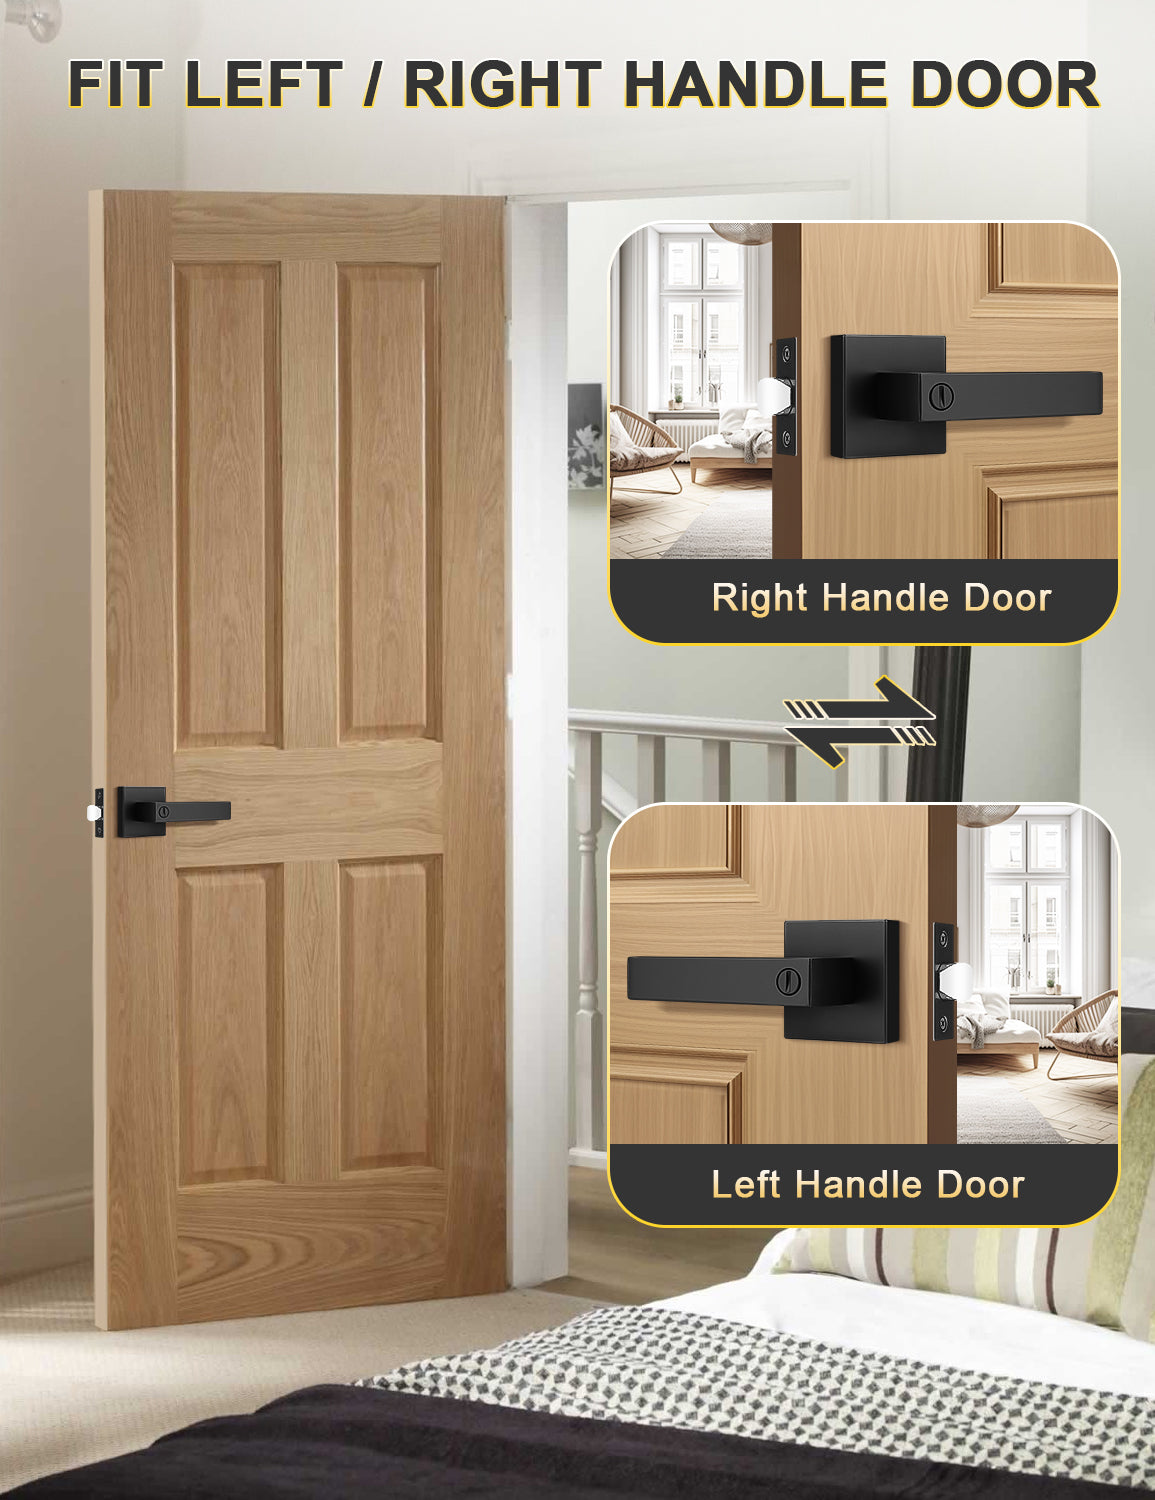 Tinewa 1 Pack Square Privacy Door Levers Locksets in Matte Black Finish, Bed/Bath Door Levers Keyless Interior Handles,Reversible for Left Right Handed Doors